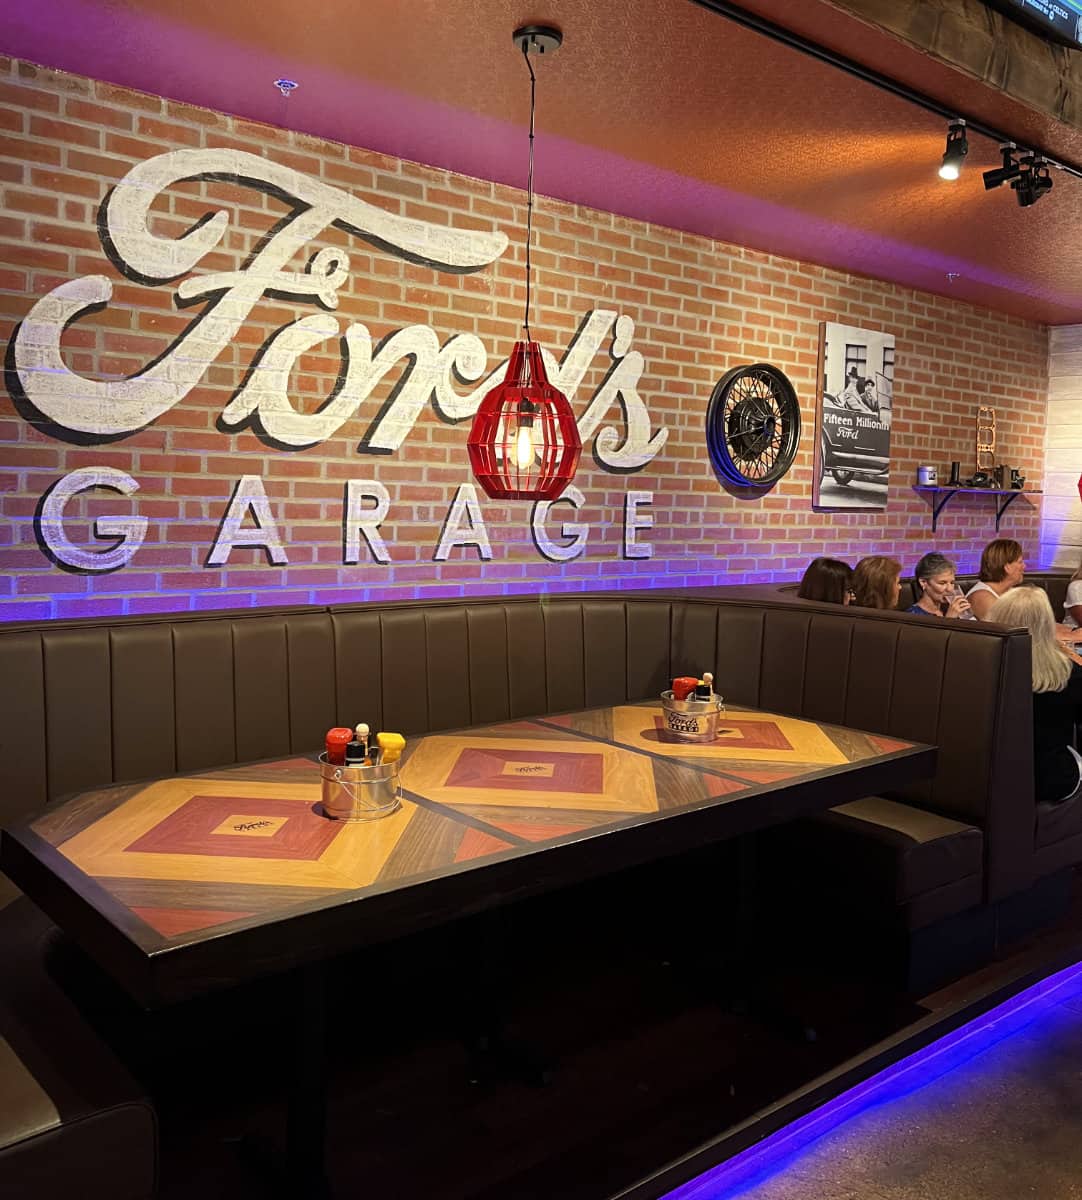 Large table seating with a brick wall and the Ford's Garage signage